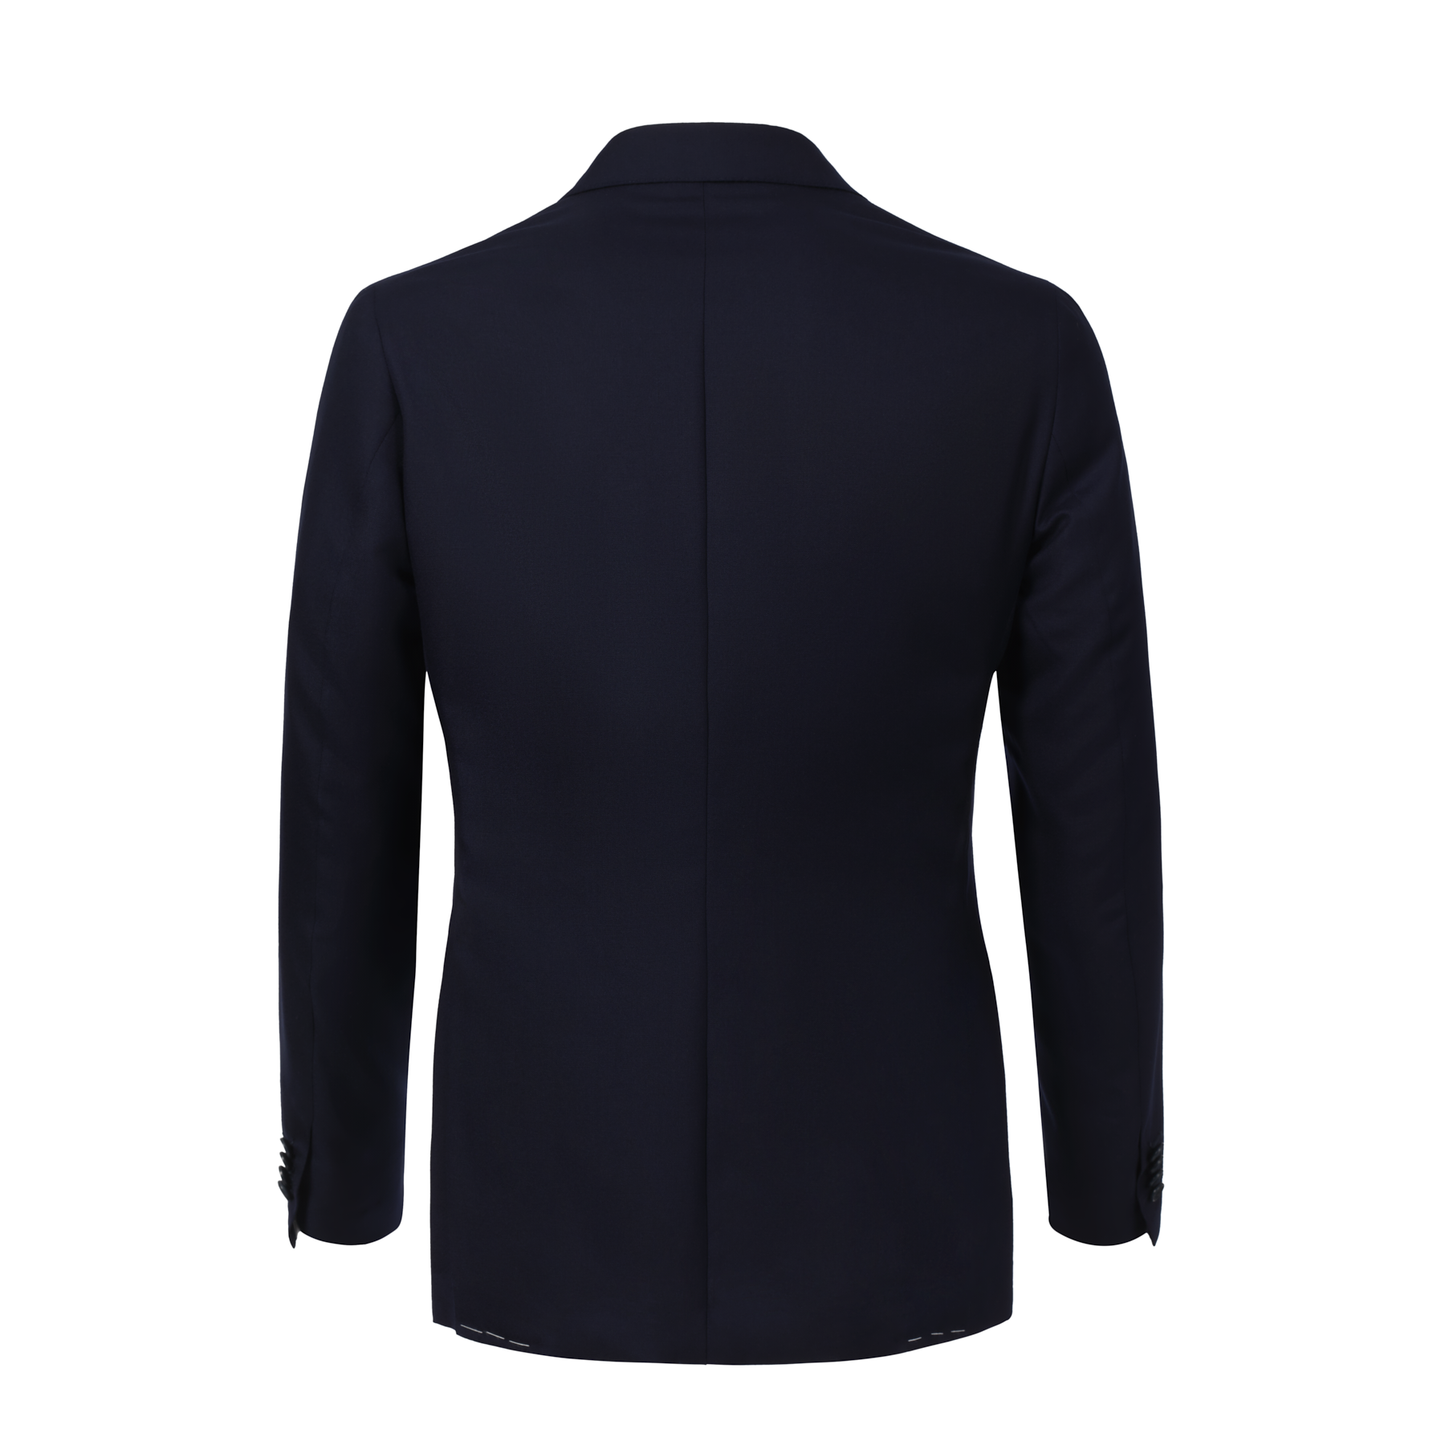 De Petrillo Single-Breasted Wool and Cashmere-Blend Suit in Dark Blue. Exclusively Made for Sartale - SARTALE